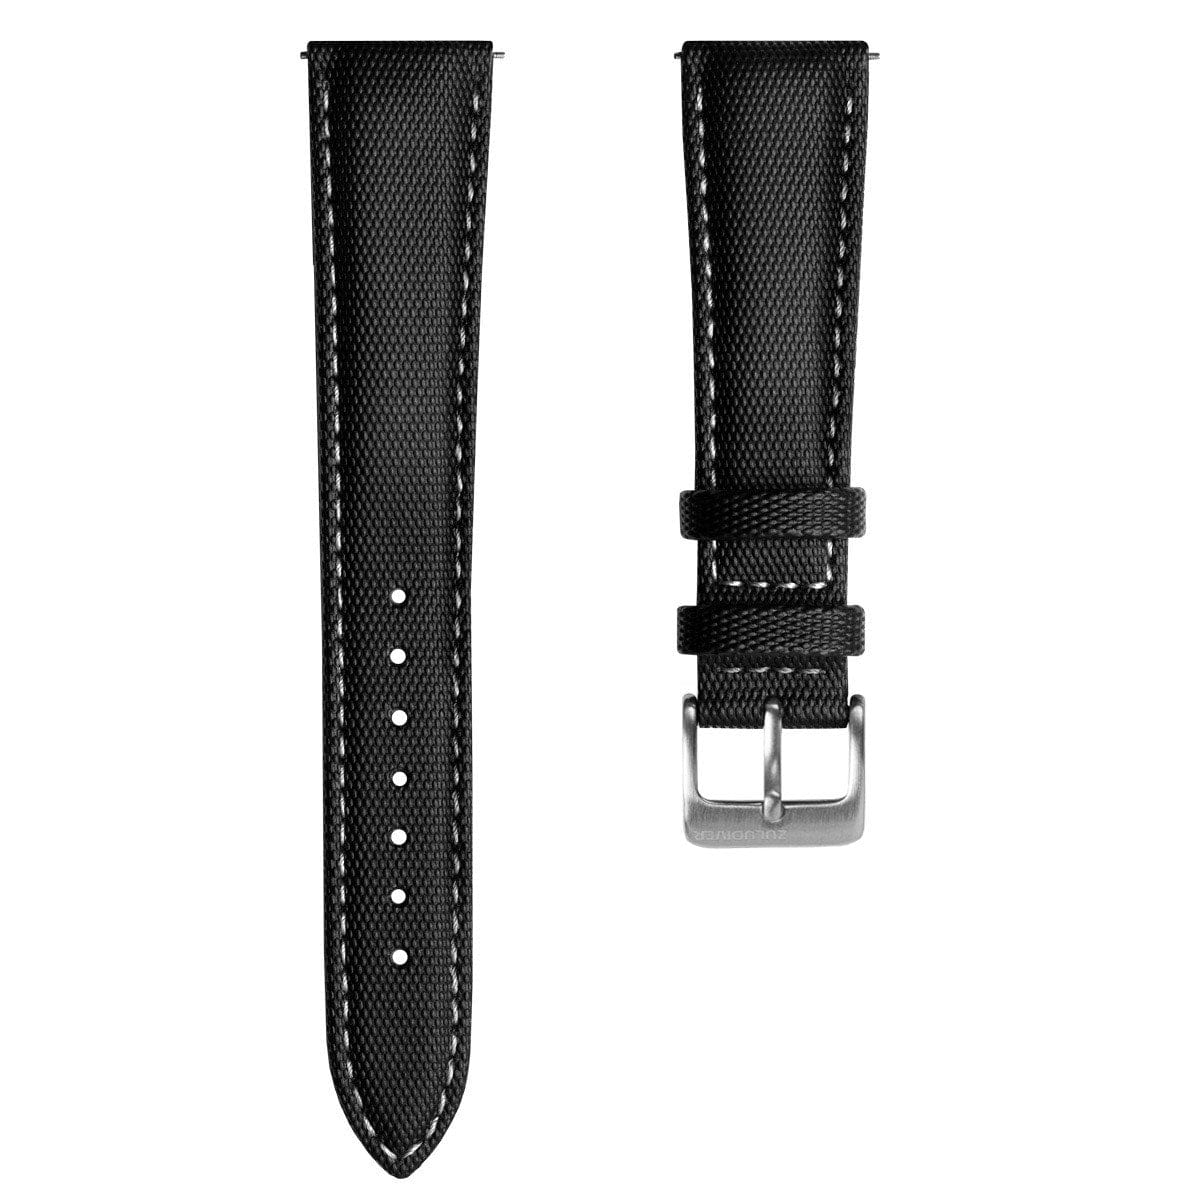 ZULUDIVER Mayday Sailcloth Padded Divers Watch Strap - Off White Stitching